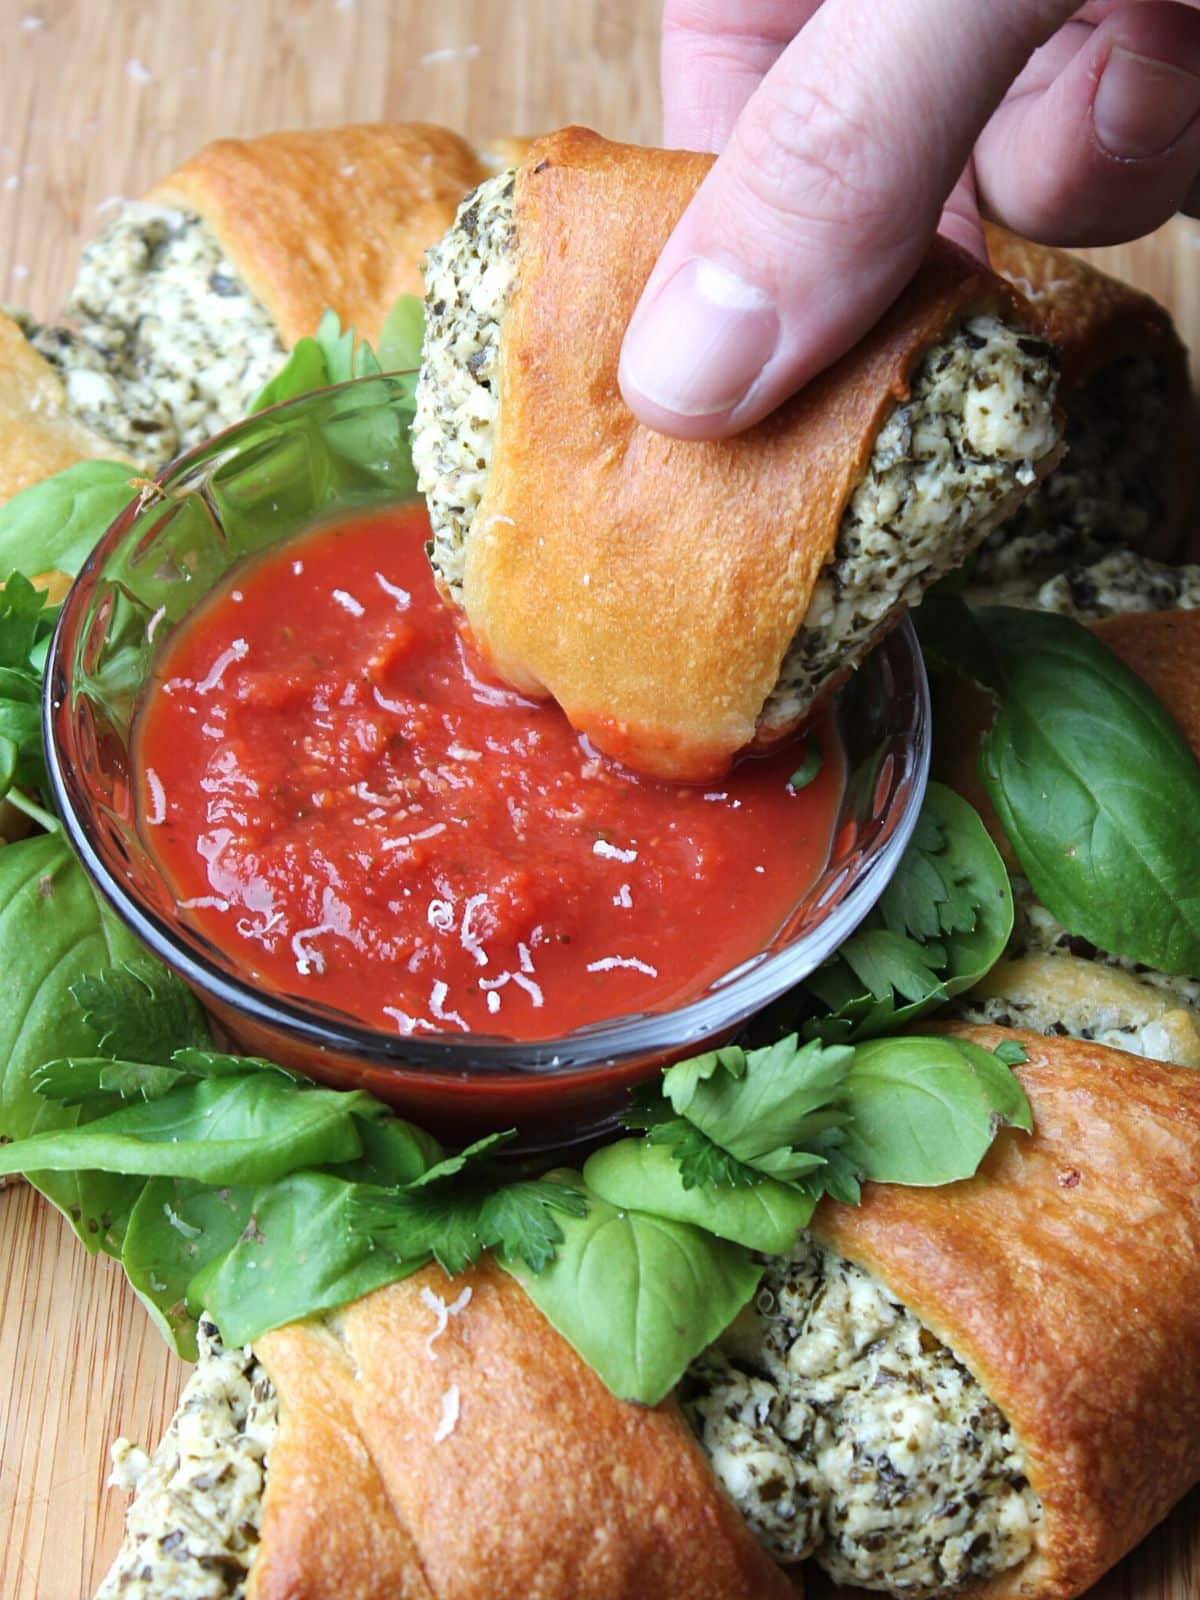 A hand is holding a stuffed crescent roll, dipping it in marinara sauce which is in the center of a crescent roll wreath.